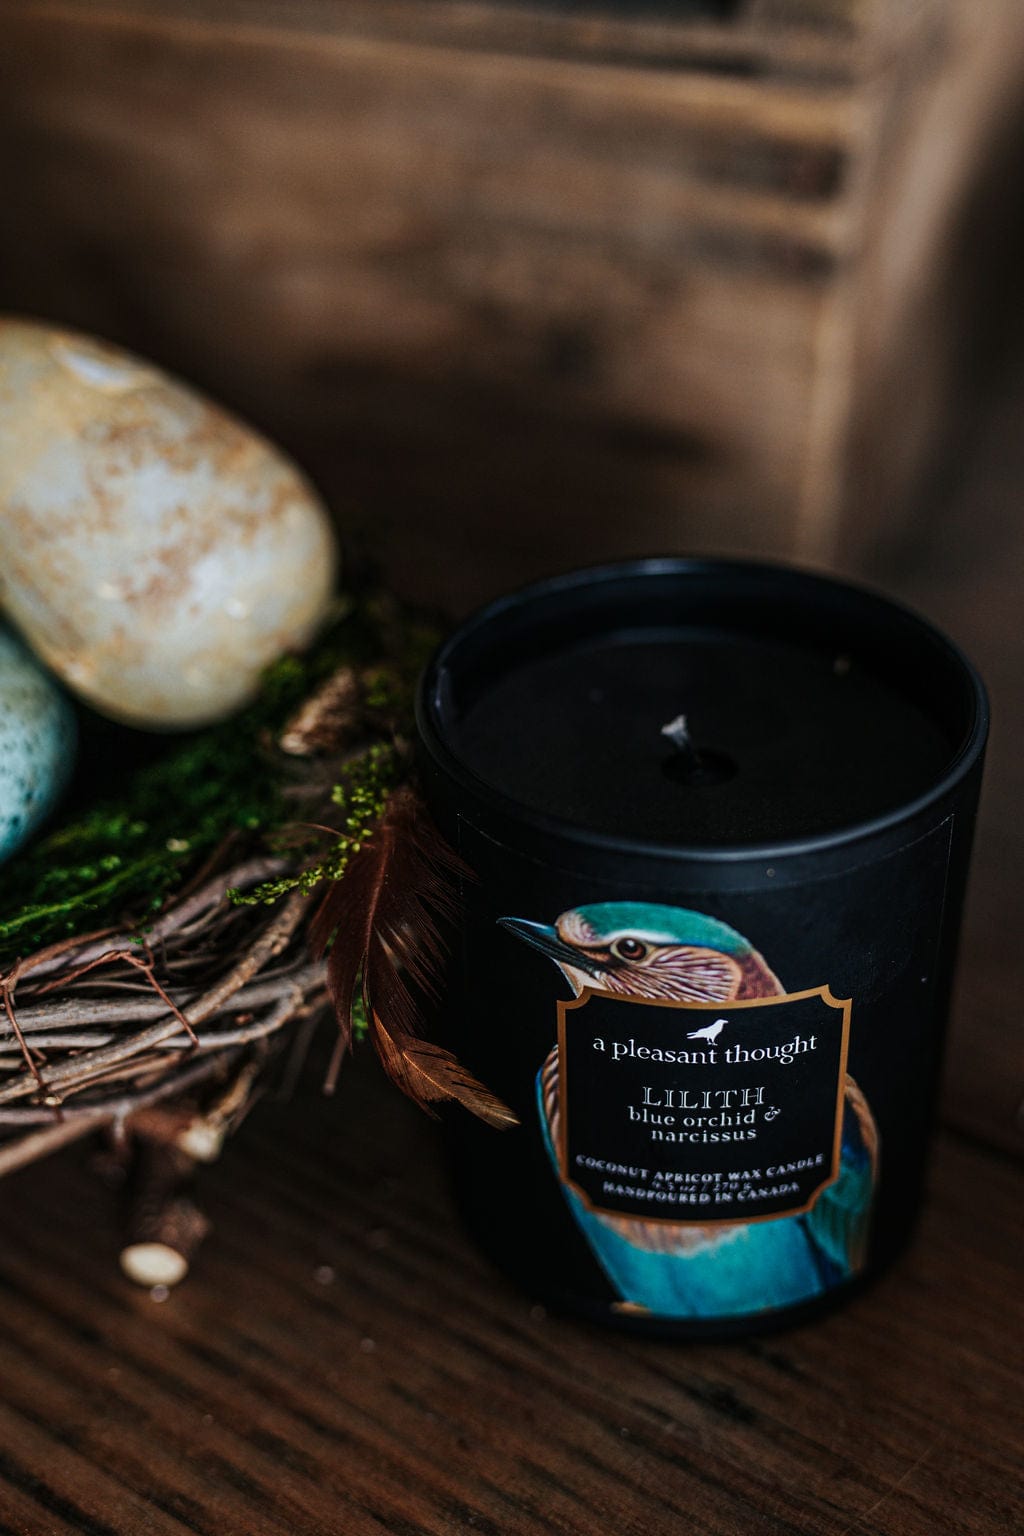 A Pleasant Thought candles Lilith: Blue Orchid & Narcissus Candle